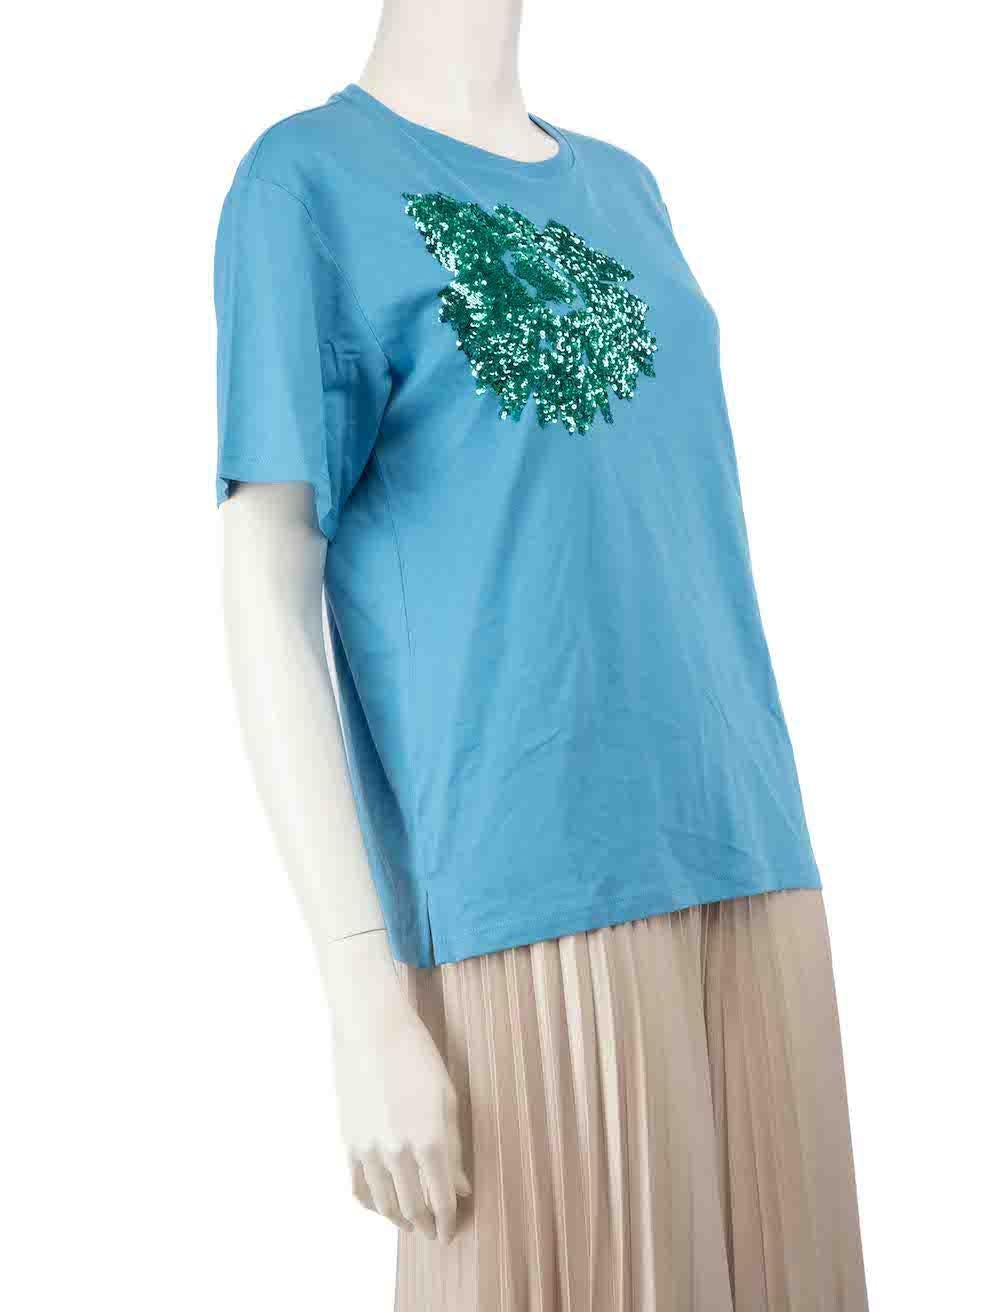 CONDITION is Very good. Hardly any visible wear to t-shirt is evident on this used Weekend Max Mara designer resale item.
 
 
 
 Details
 
 
 Blue
 
 Cotton
 
 Short sleeves T-shirt
 
 Round neckline
 
 Sequin embellishment
 
 Round neckline
 
